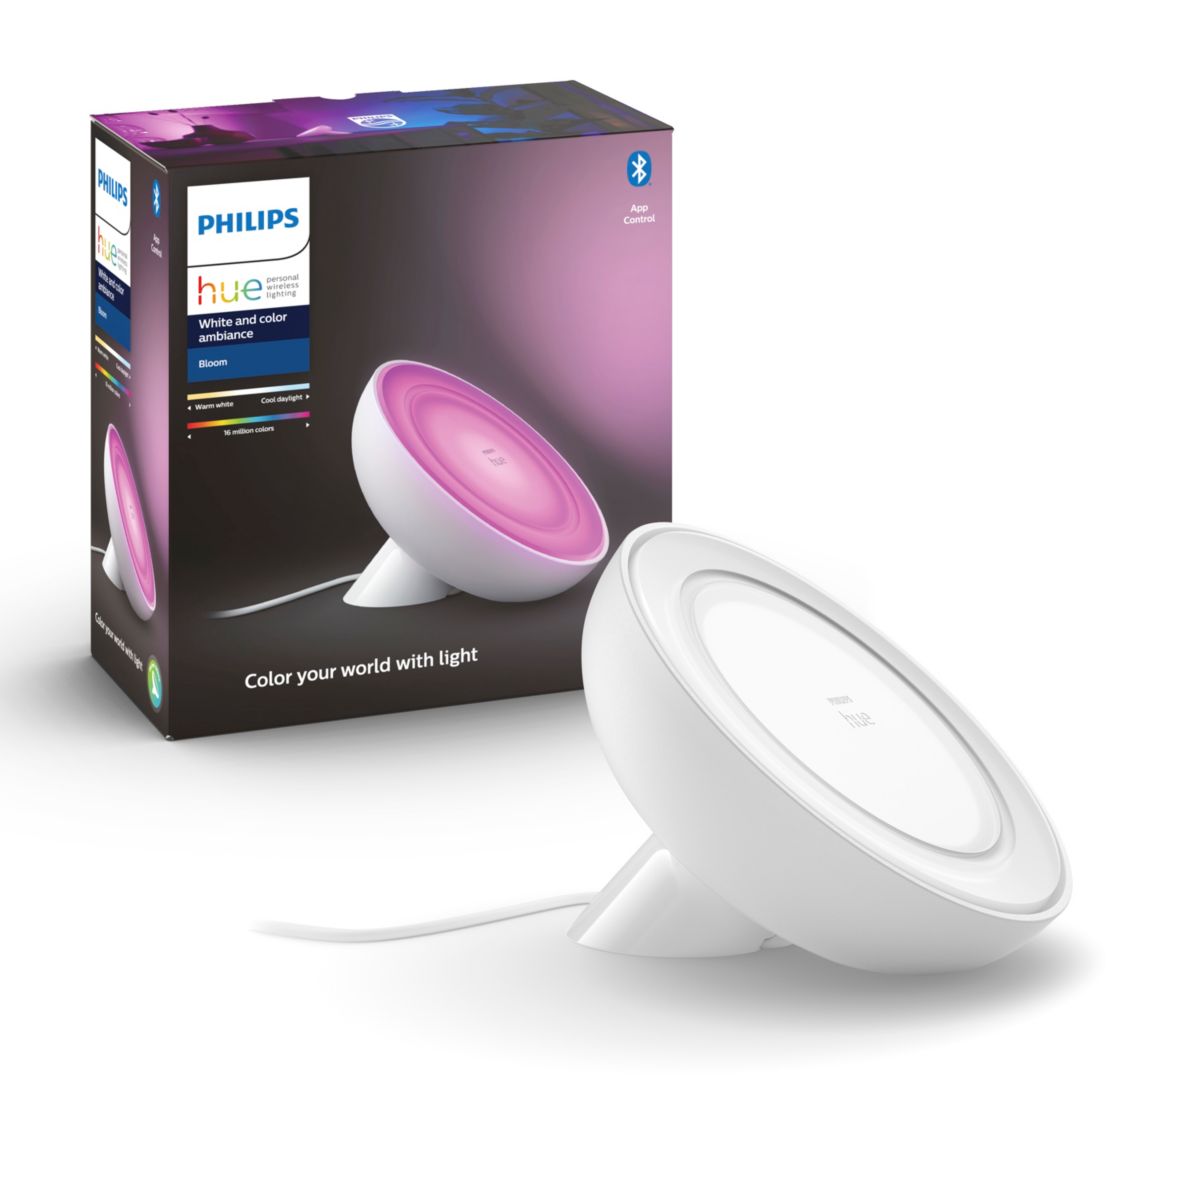 Lampka Bloom Philips hue White and color ambiance 8718699770983 929002375901